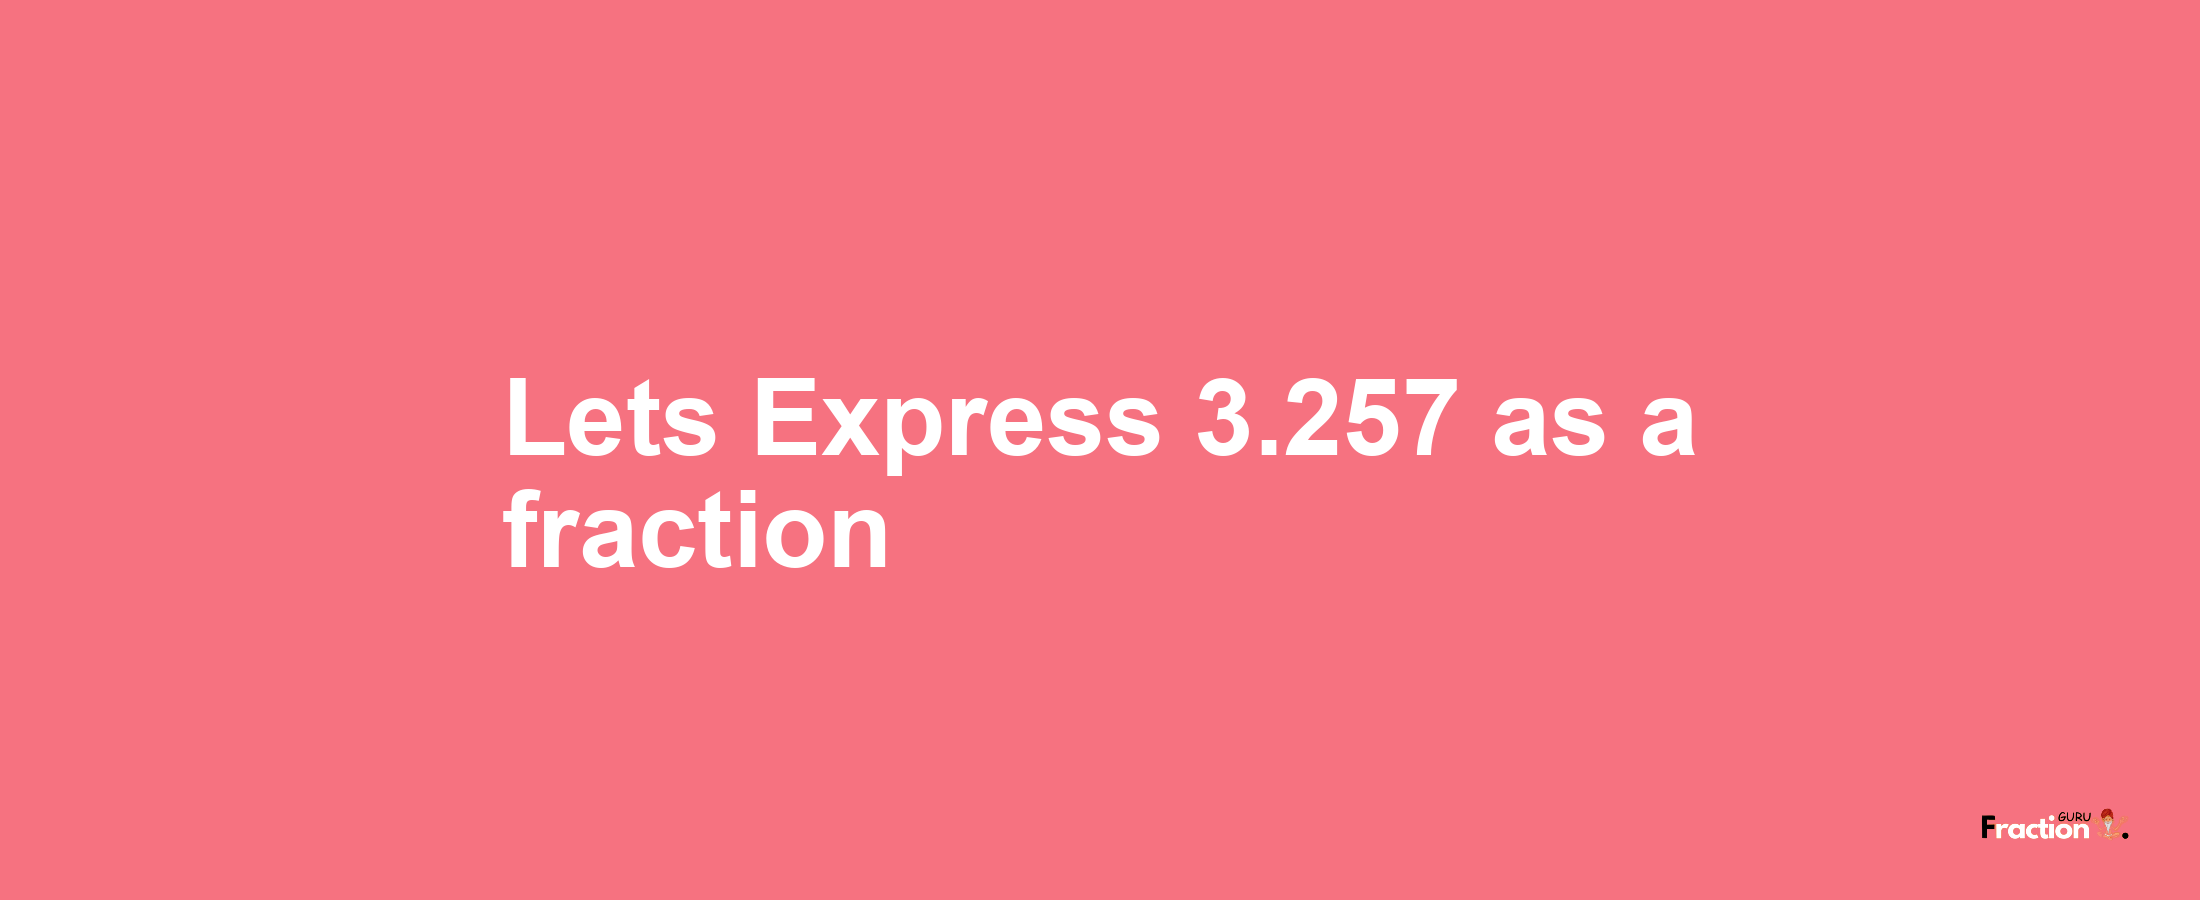 Lets Express 3.257 as afraction